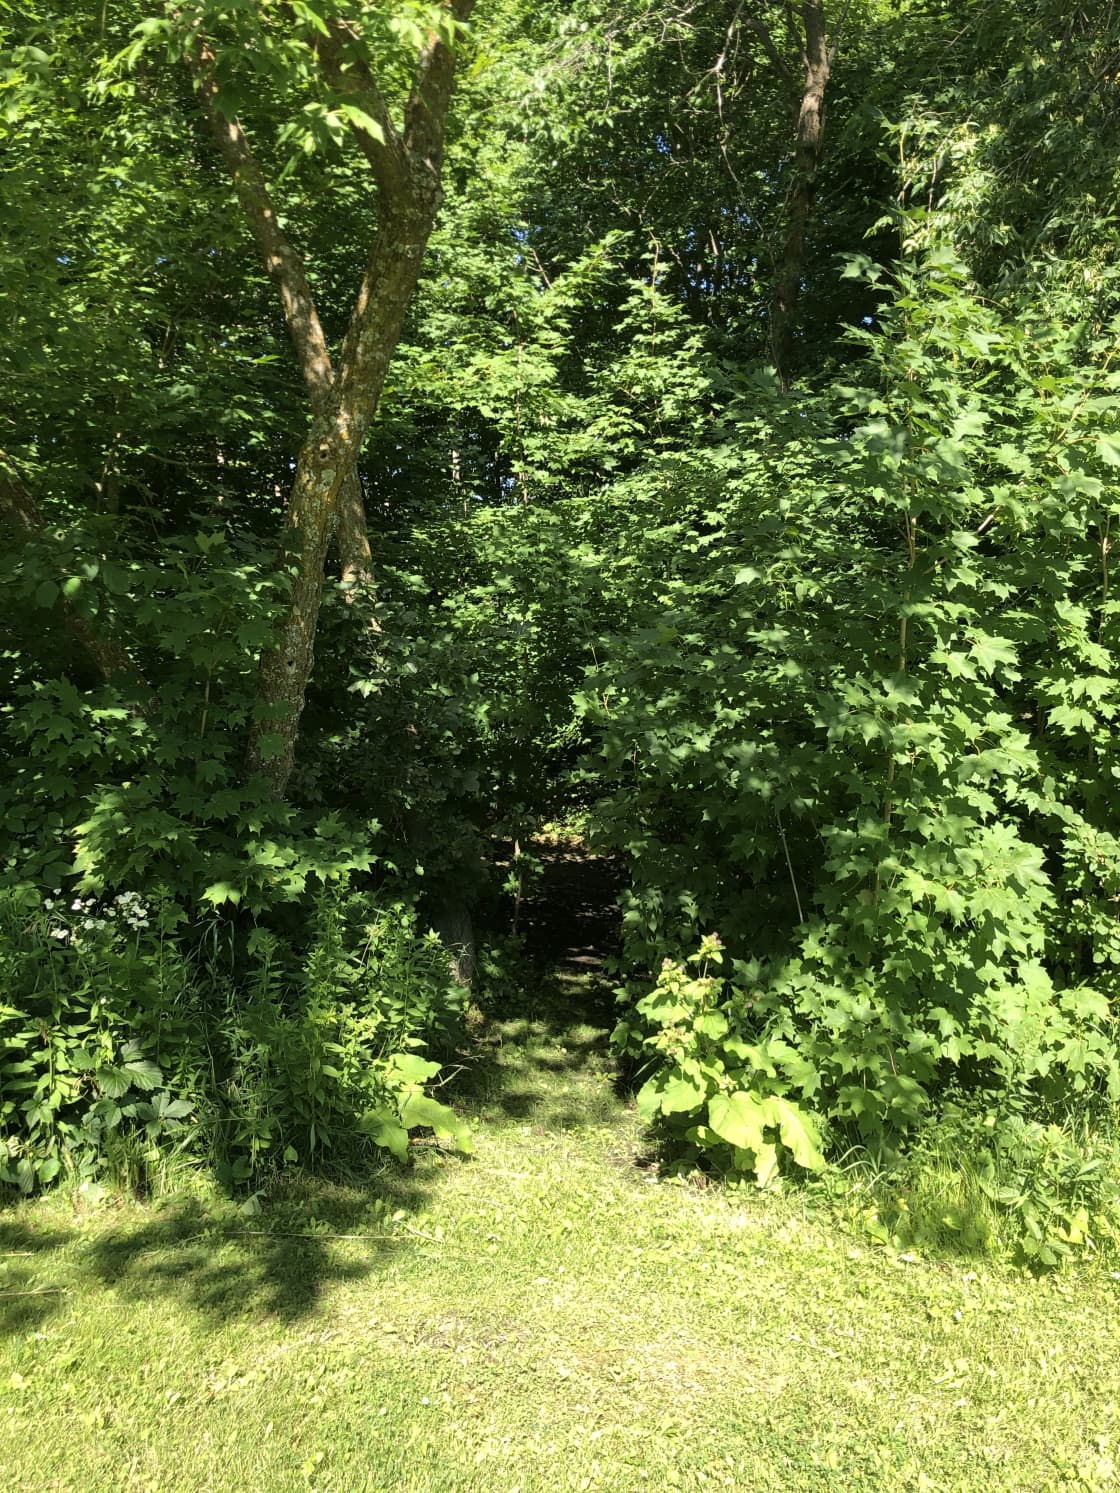 Entrance to a tent site tucked into the woods that will also have a platform in time.